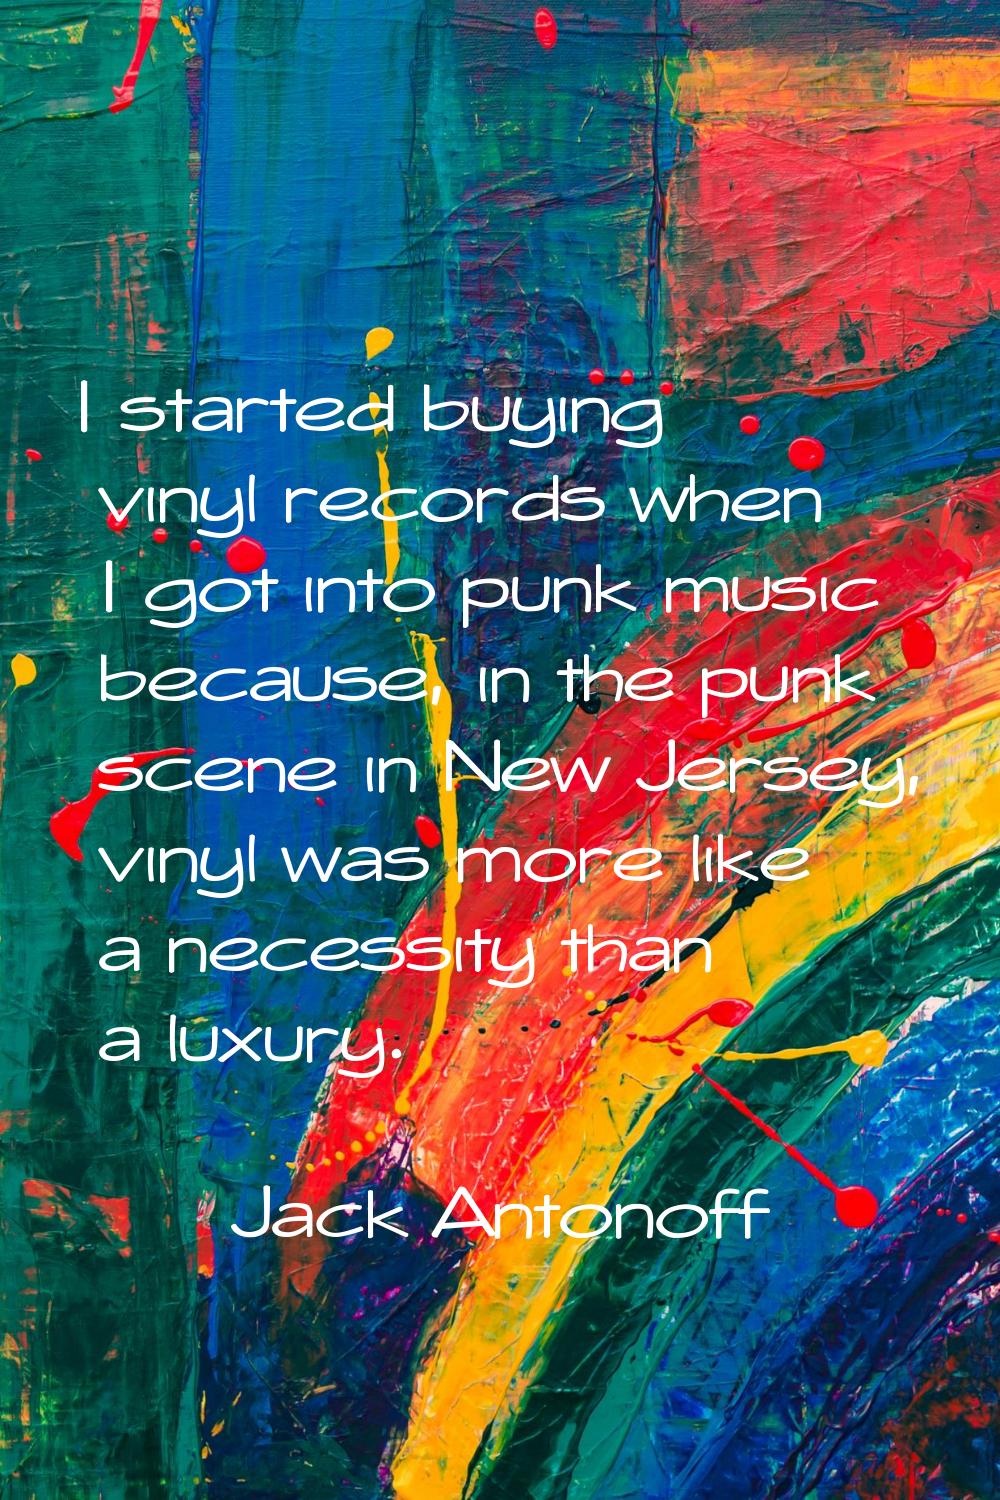 I started buying vinyl records when I got into punk music because, in the punk scene in New Jersey,